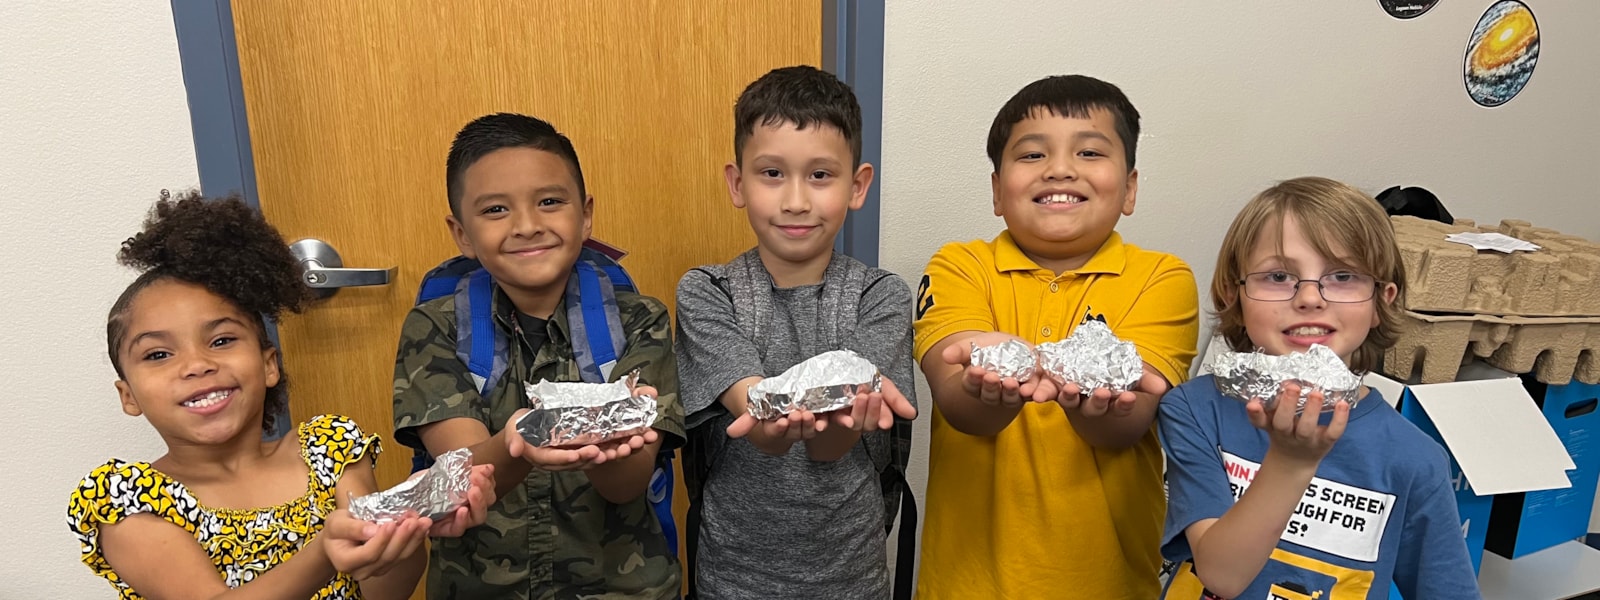 Students in iExplore with foil boats